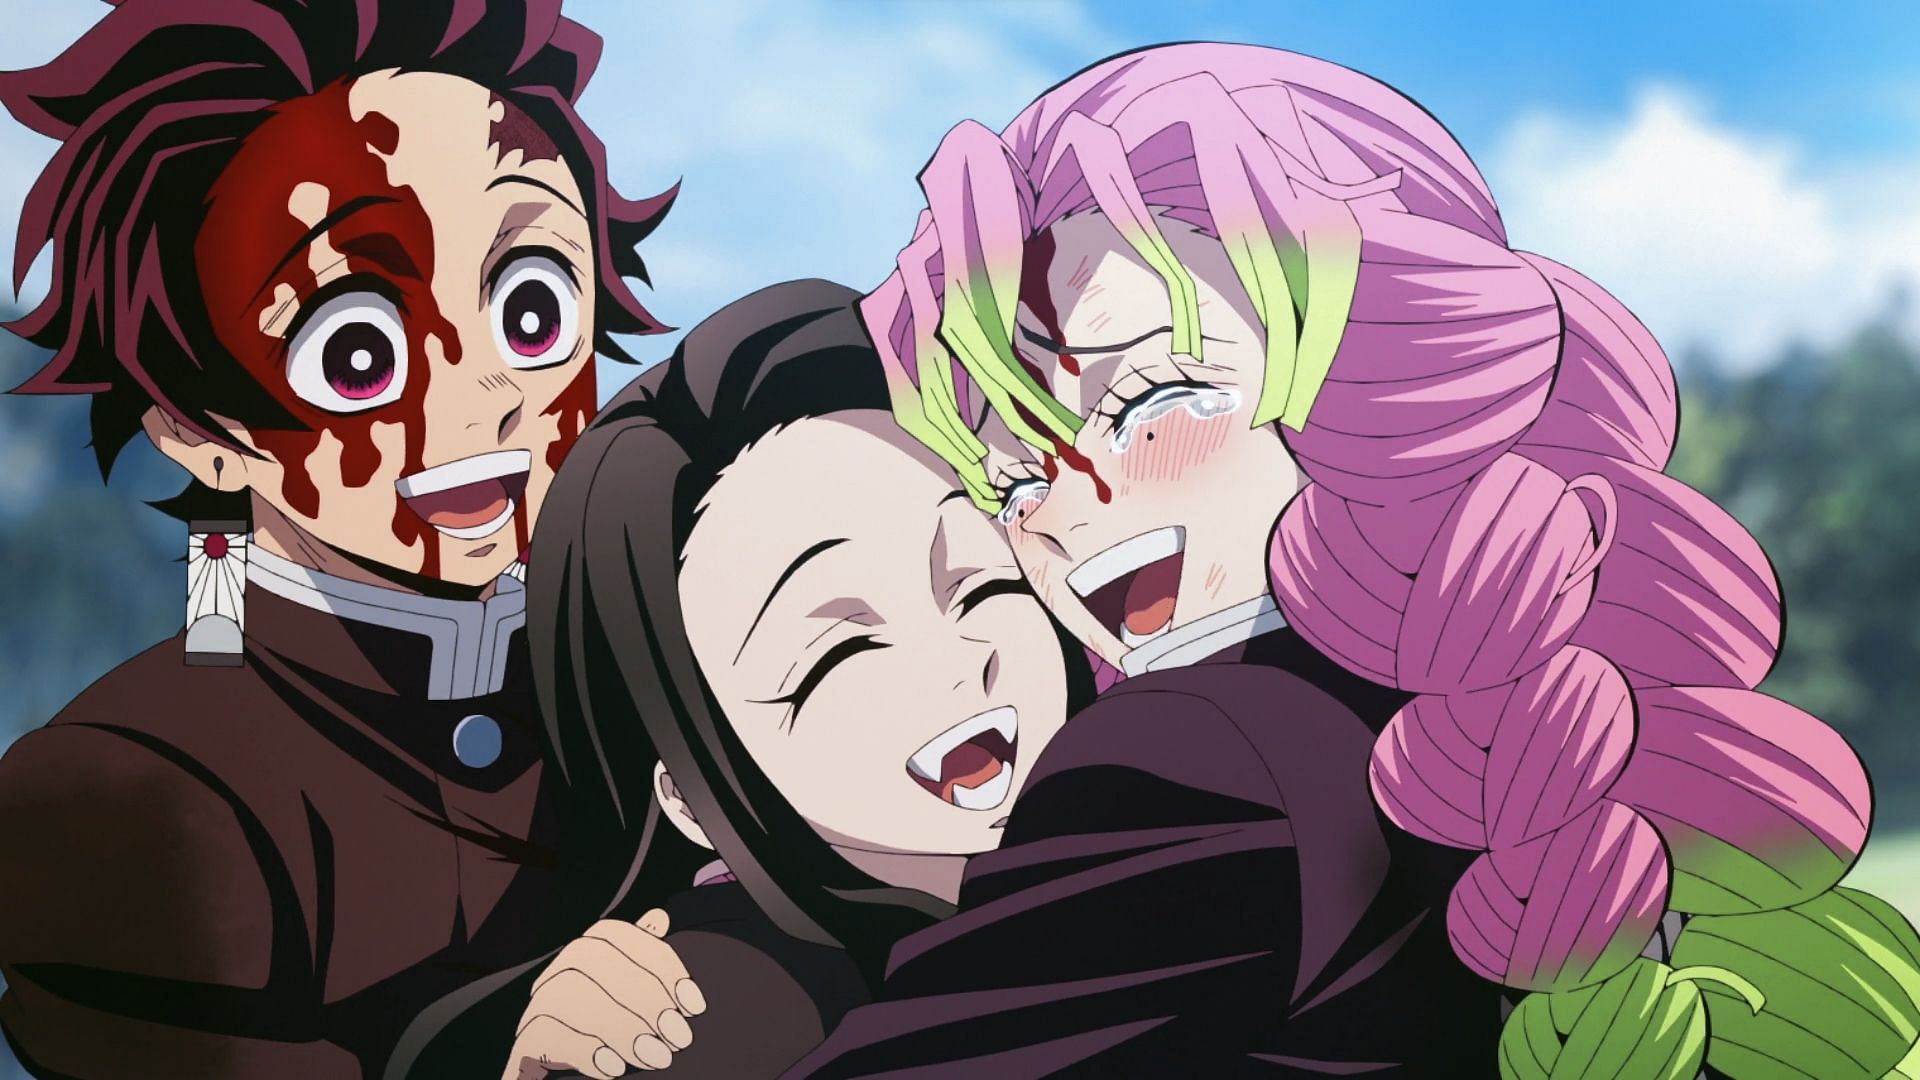 Demon Slayer's Season 3 Ending Explained: What Happens at the End